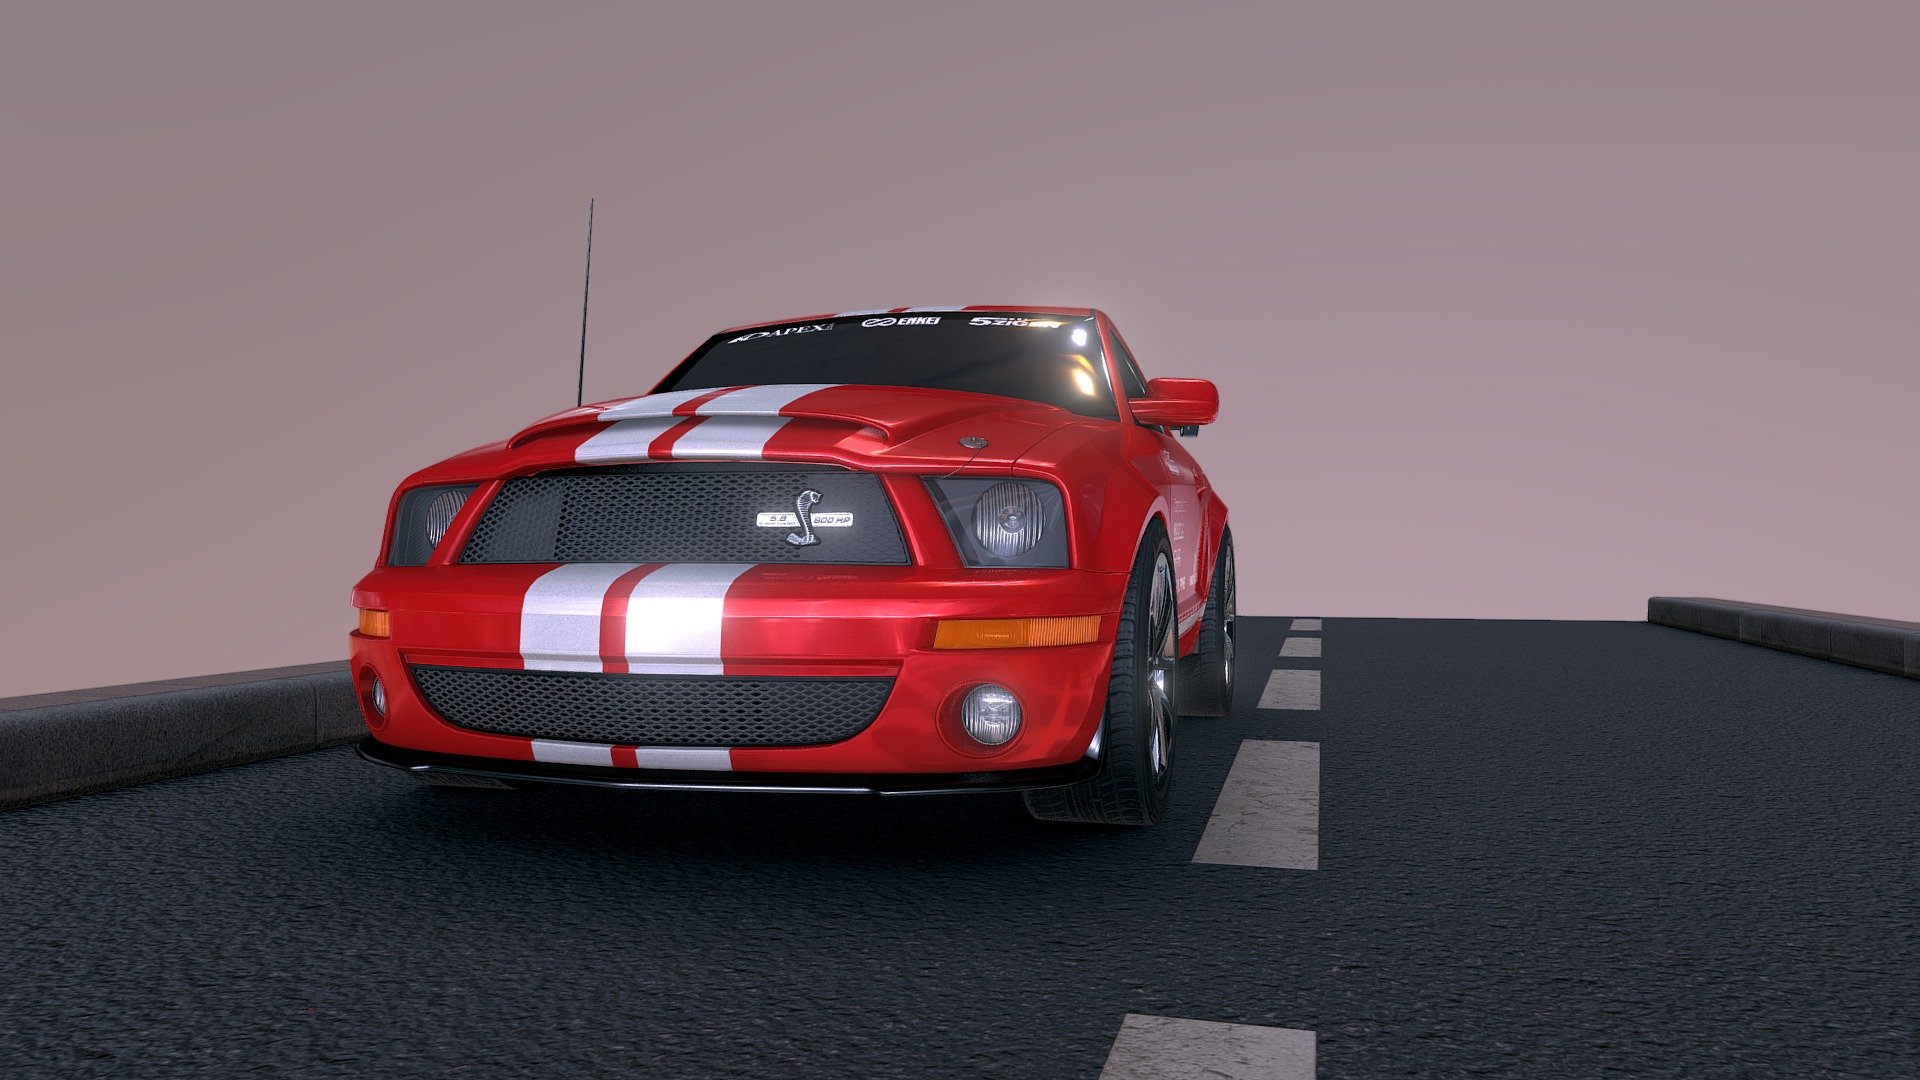 Ford Shelby GT500 little Car  Driveing on the road - Ford Shelby GT500 little Car - 3D model by kyzy_10642 3d model